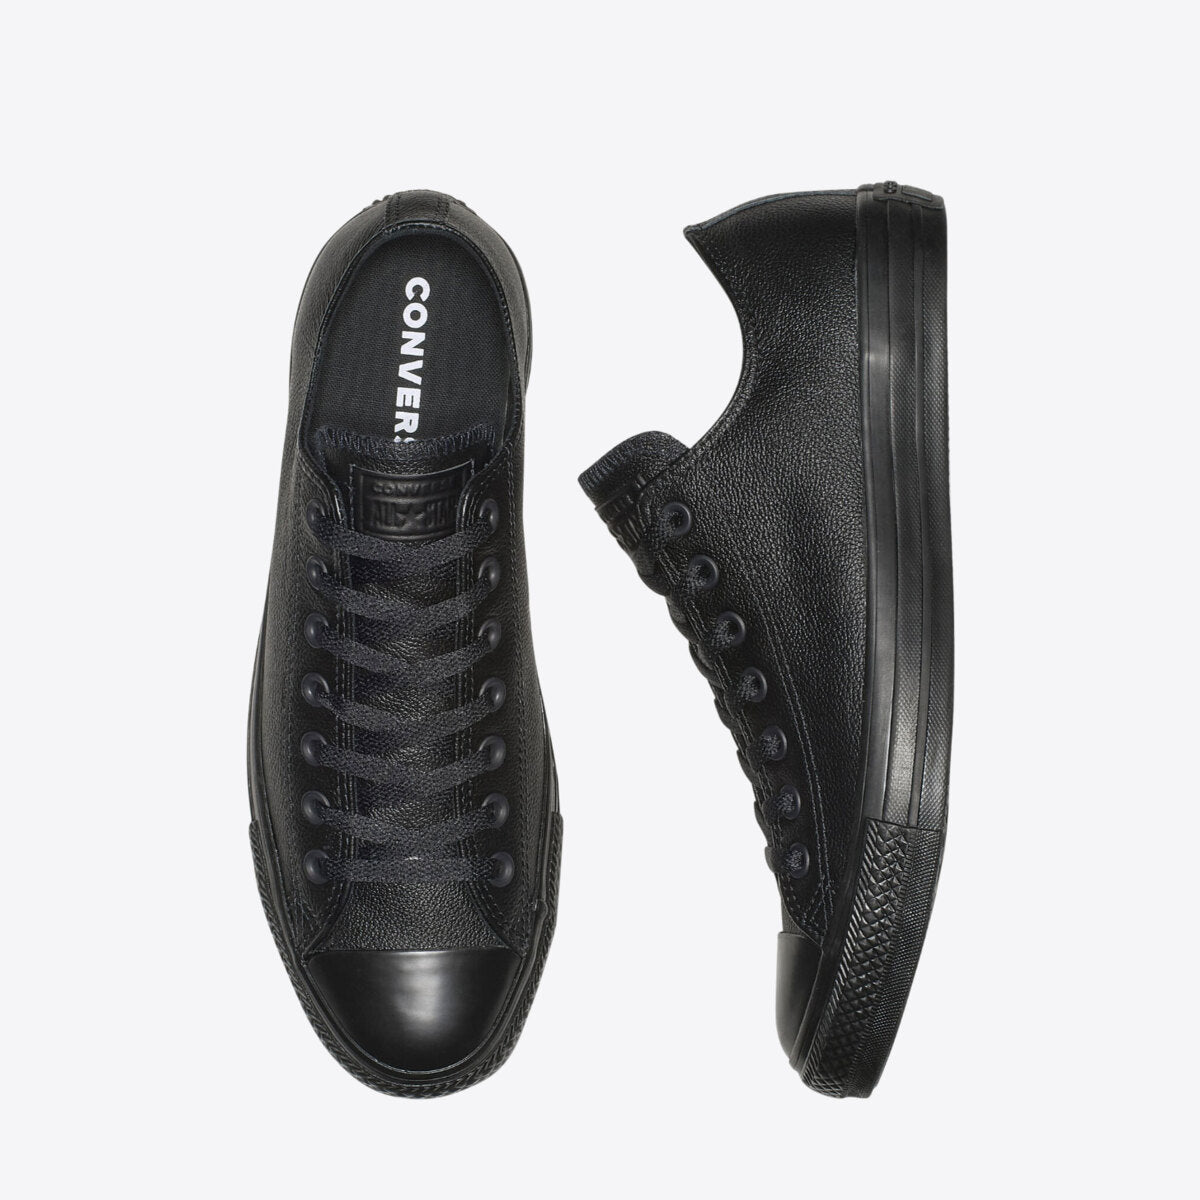 CONVERSE Chuck Taylor All Star Leather Low Black Mono - Image 4